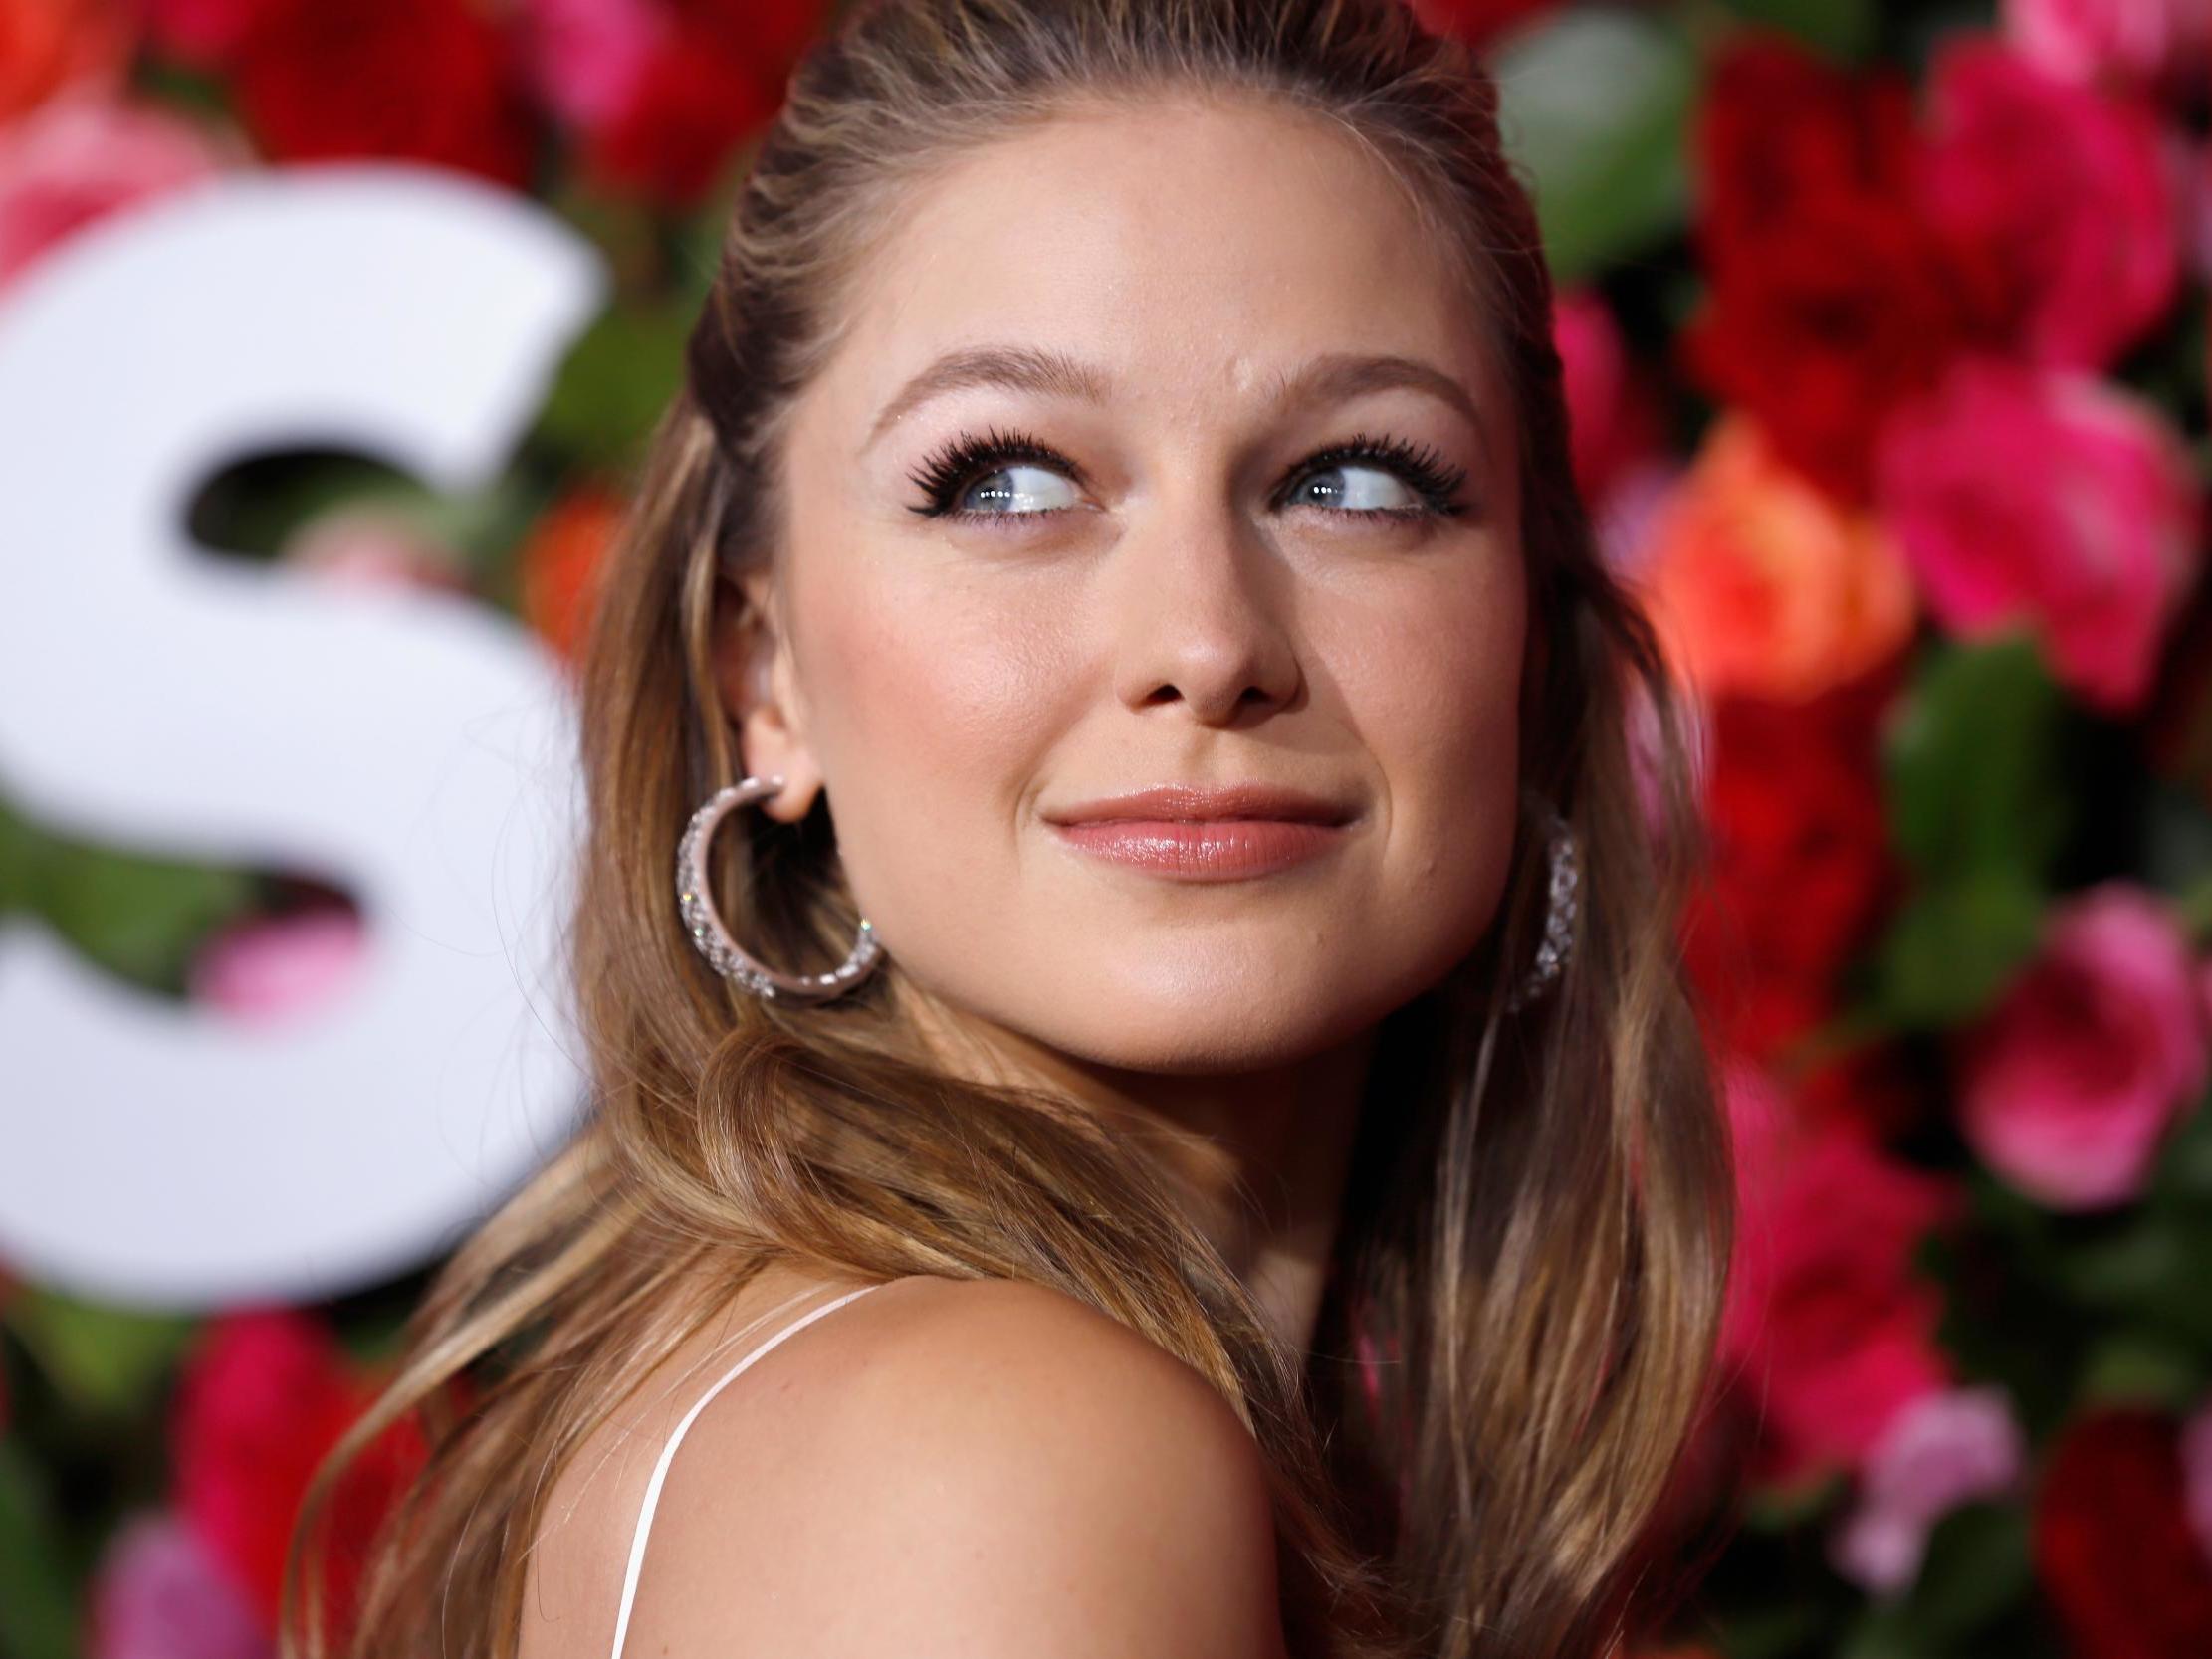 Supergirl Star Melissa Benoist Says She Is A Domestic